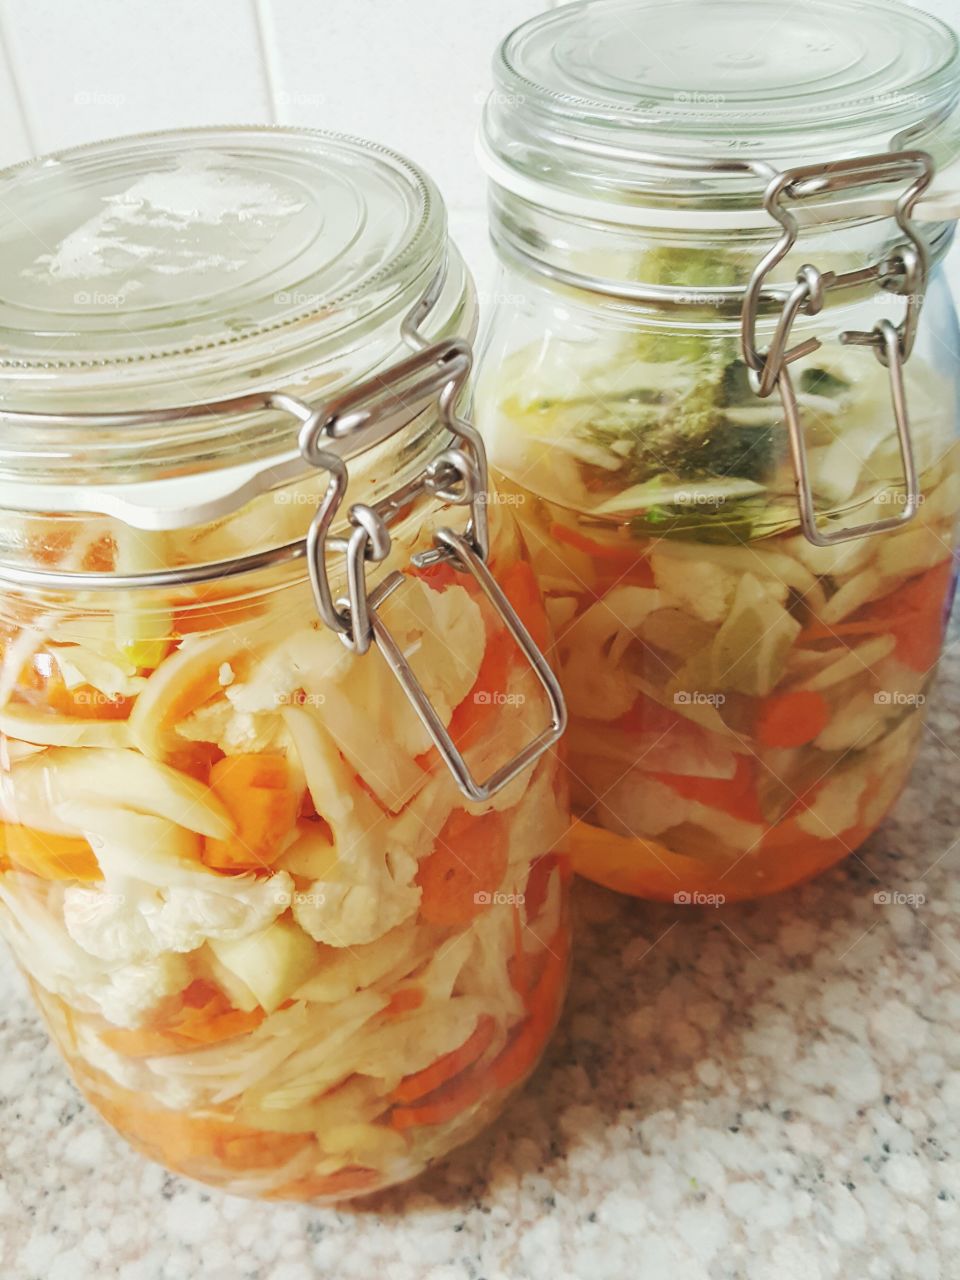 Pickled vegetables in the making